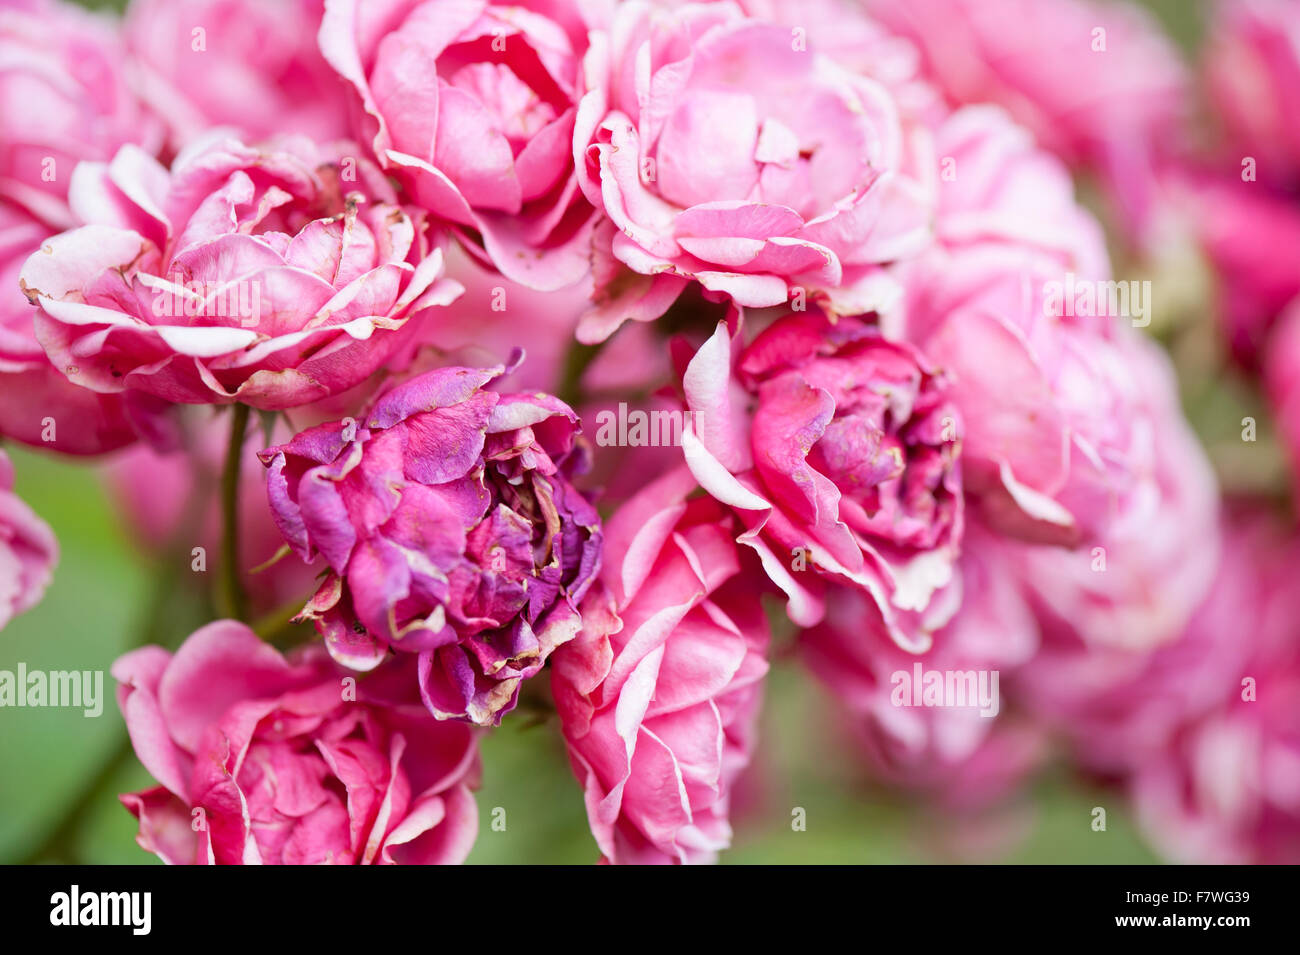 Withering pink roses, fading away pink flowers in July, shed blossoms plant growing in Polish ornamental garden, flowers bunch Stock Photo